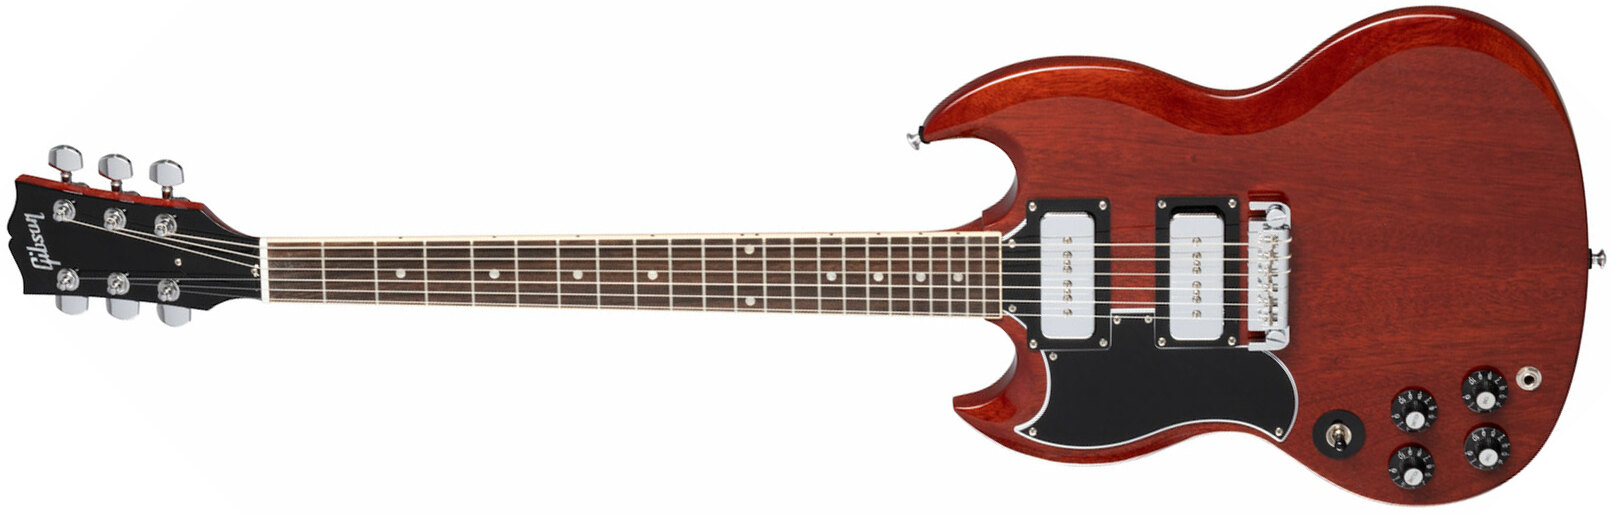 Gibson Sg Tony Iommi Special Lh Gaucher Signature 2p90 Ht Rw - Vintage Cherry - Left-handed electric guitar - Main picture